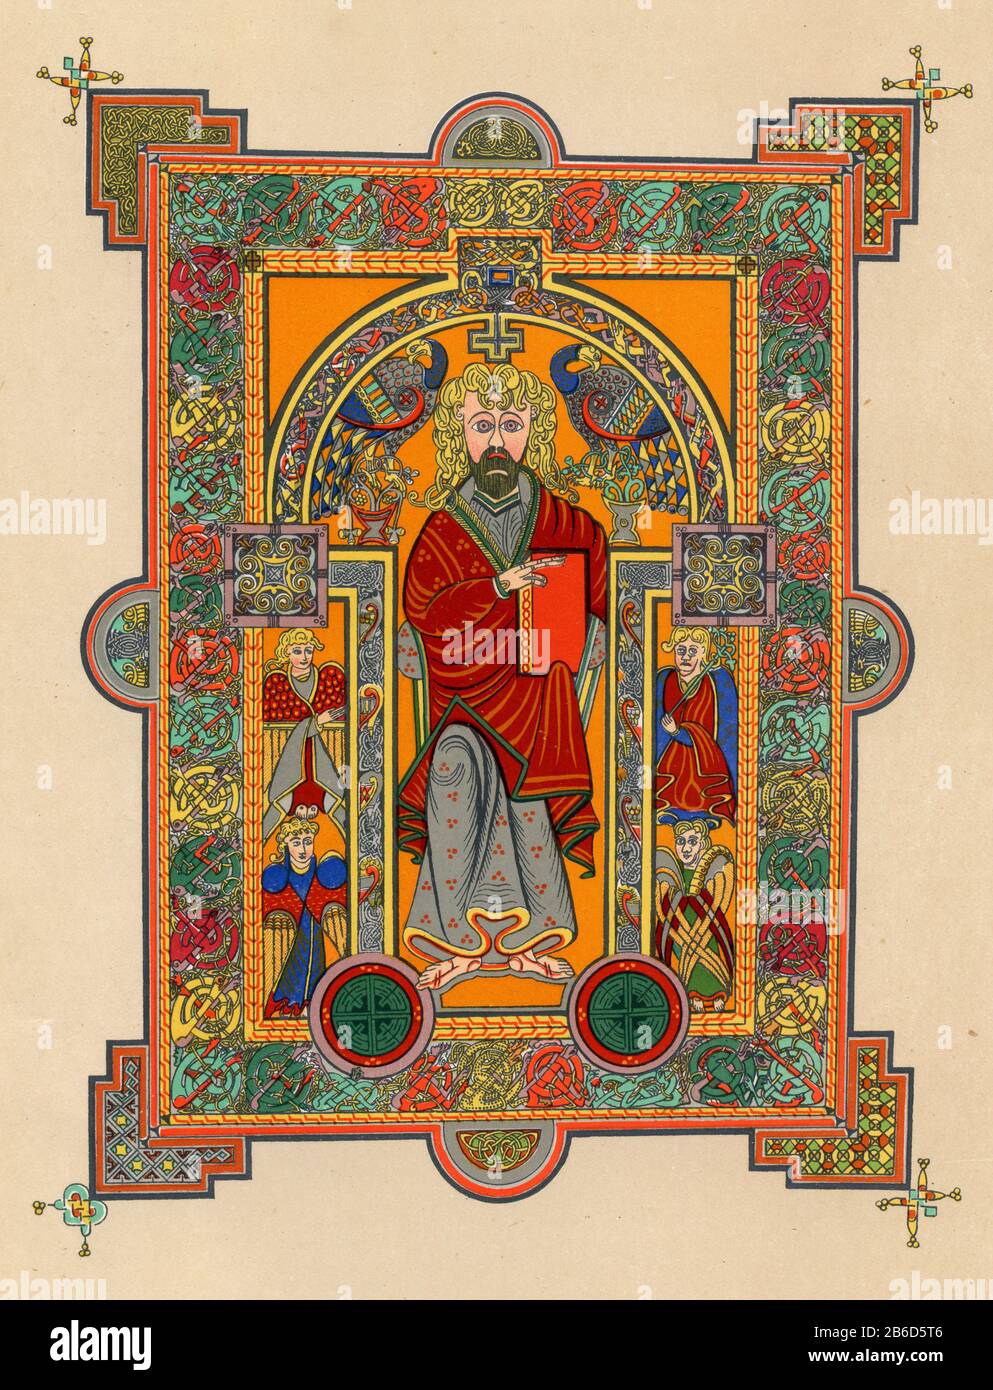 The Book of Kells: Christ holding a Gospel book, c800. Here we see Christ seated on a throne, flanked by peacocks, symbols of his resurrection due to the belief that their flesh did not rot. Stock Photo